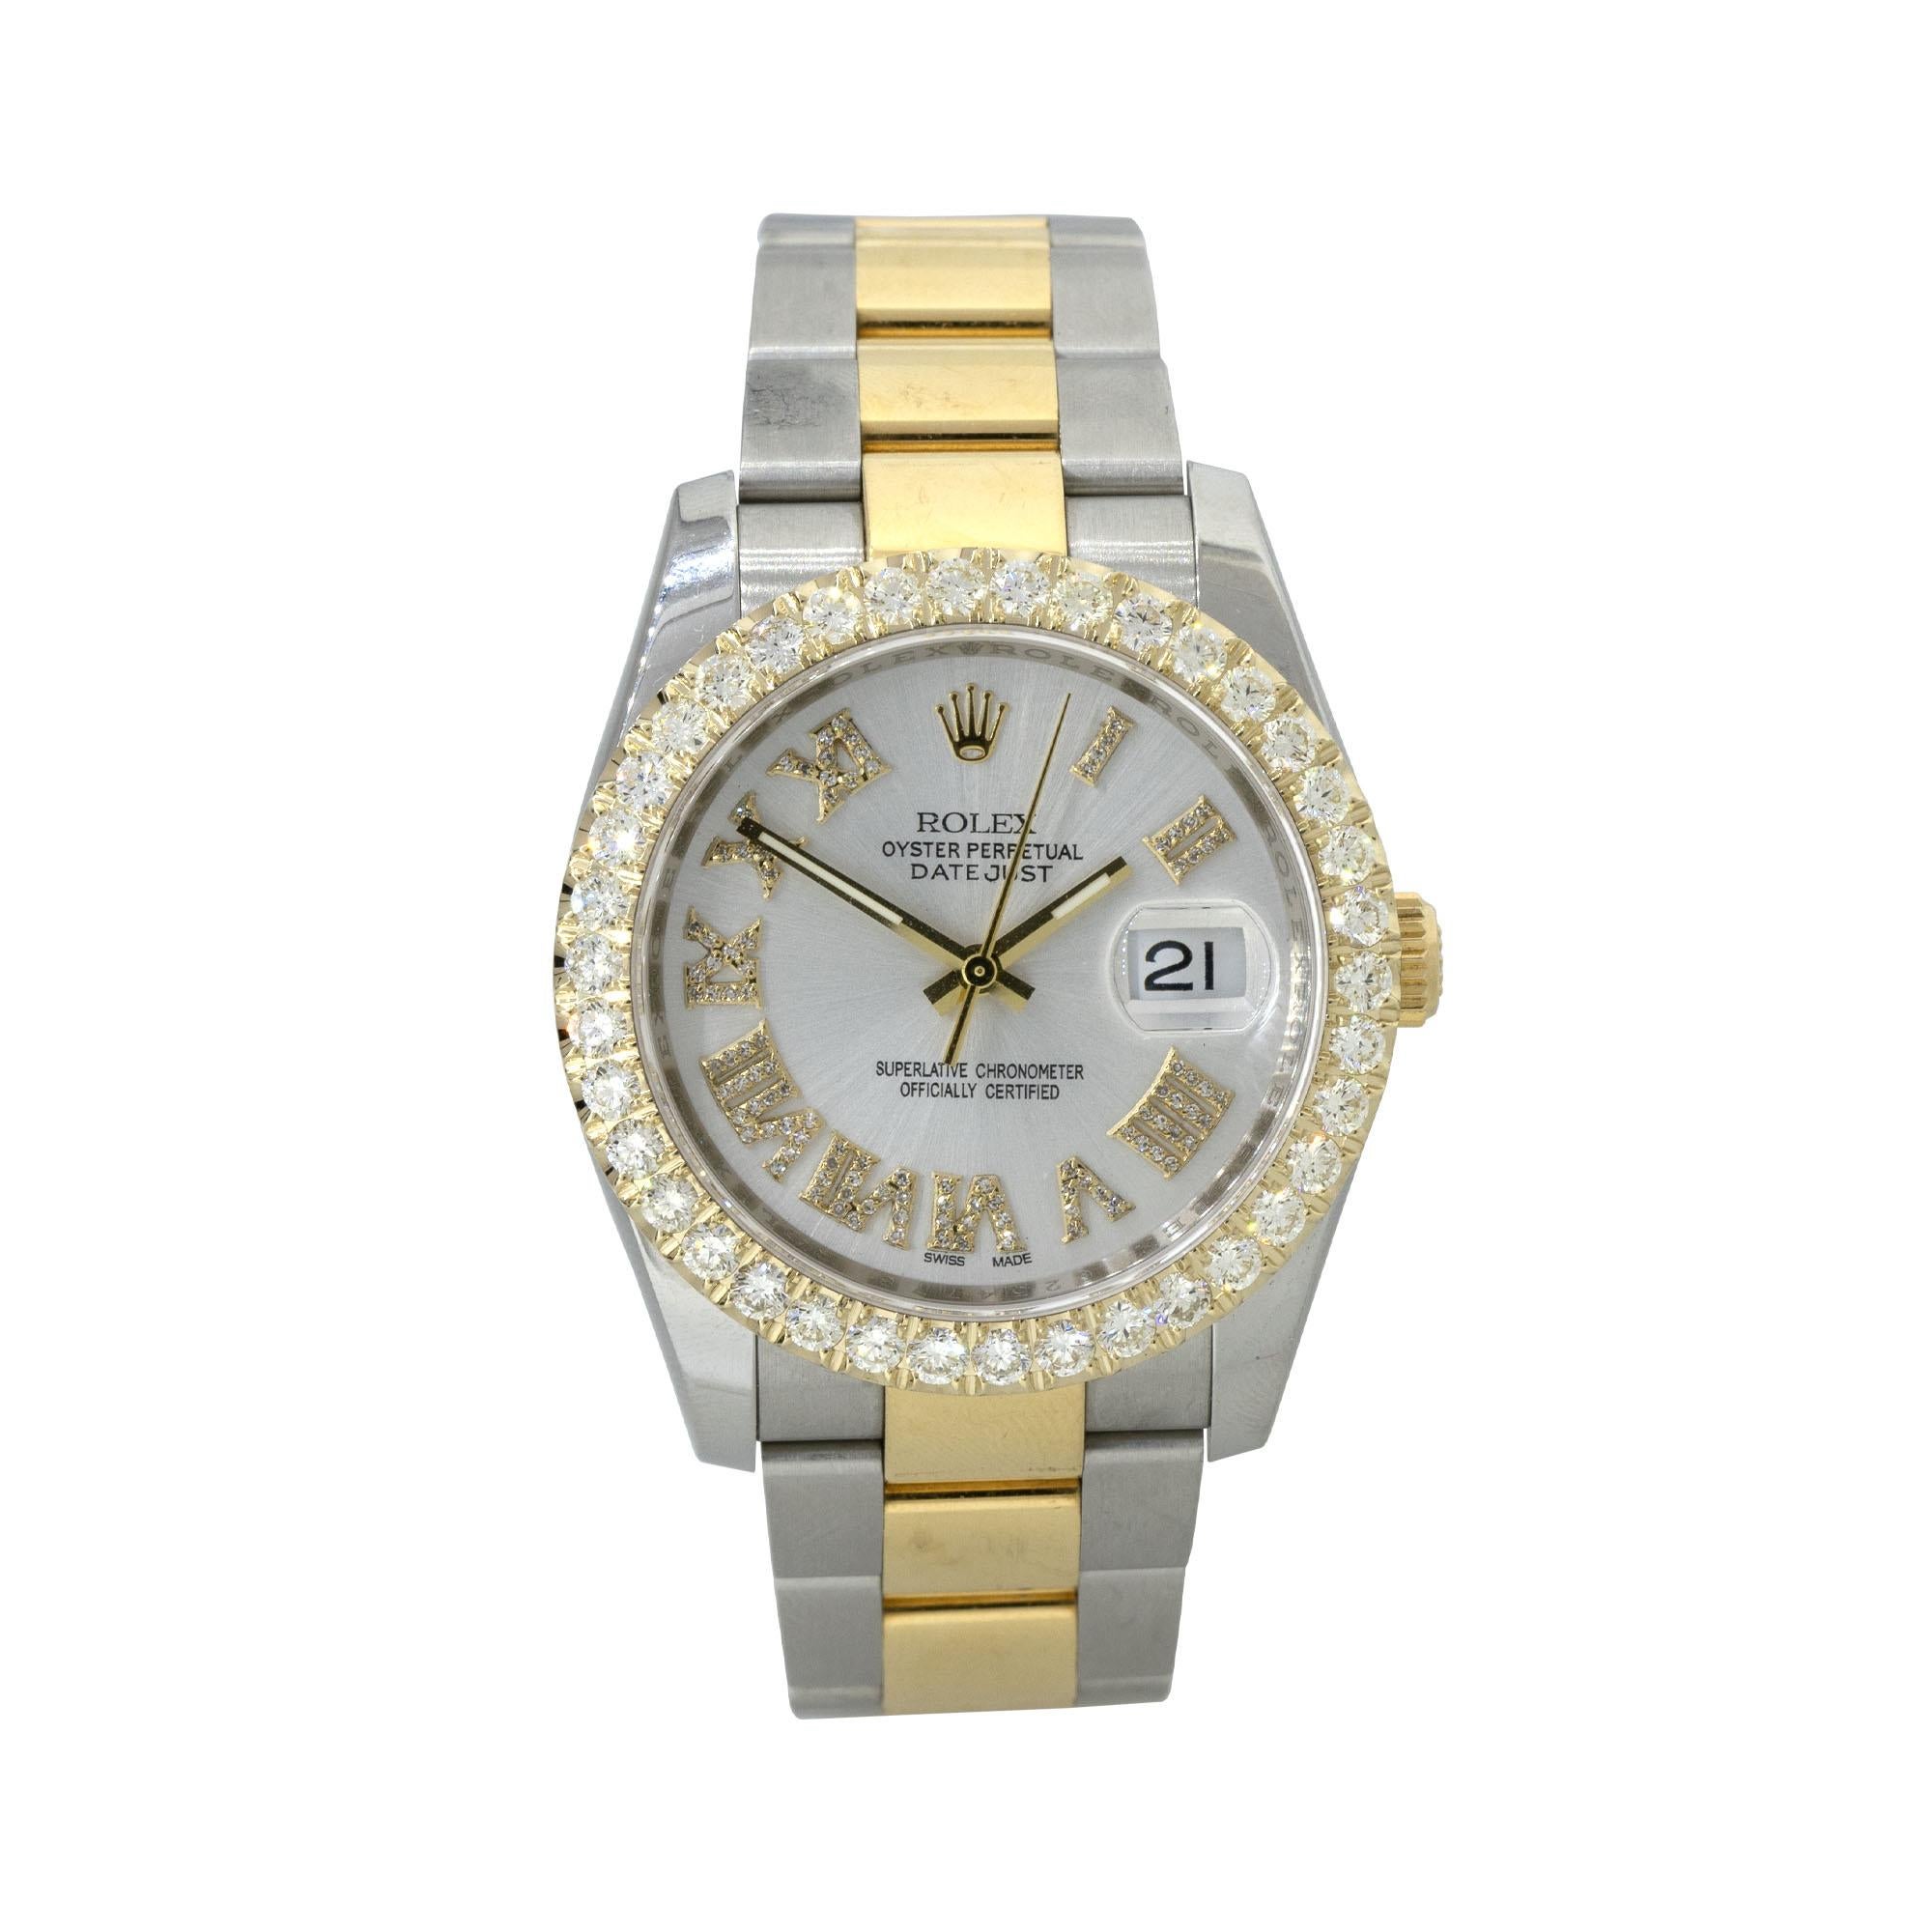 Rolex 116203 Datejust Two Tone Silver Diamond Dial Watch
The Rolex 116203 Datejust with a silver diamond dial is a symbol of timeless luxury and elegance. The combination of two-tone materials and the exquisite diamond markers on the dial make it a